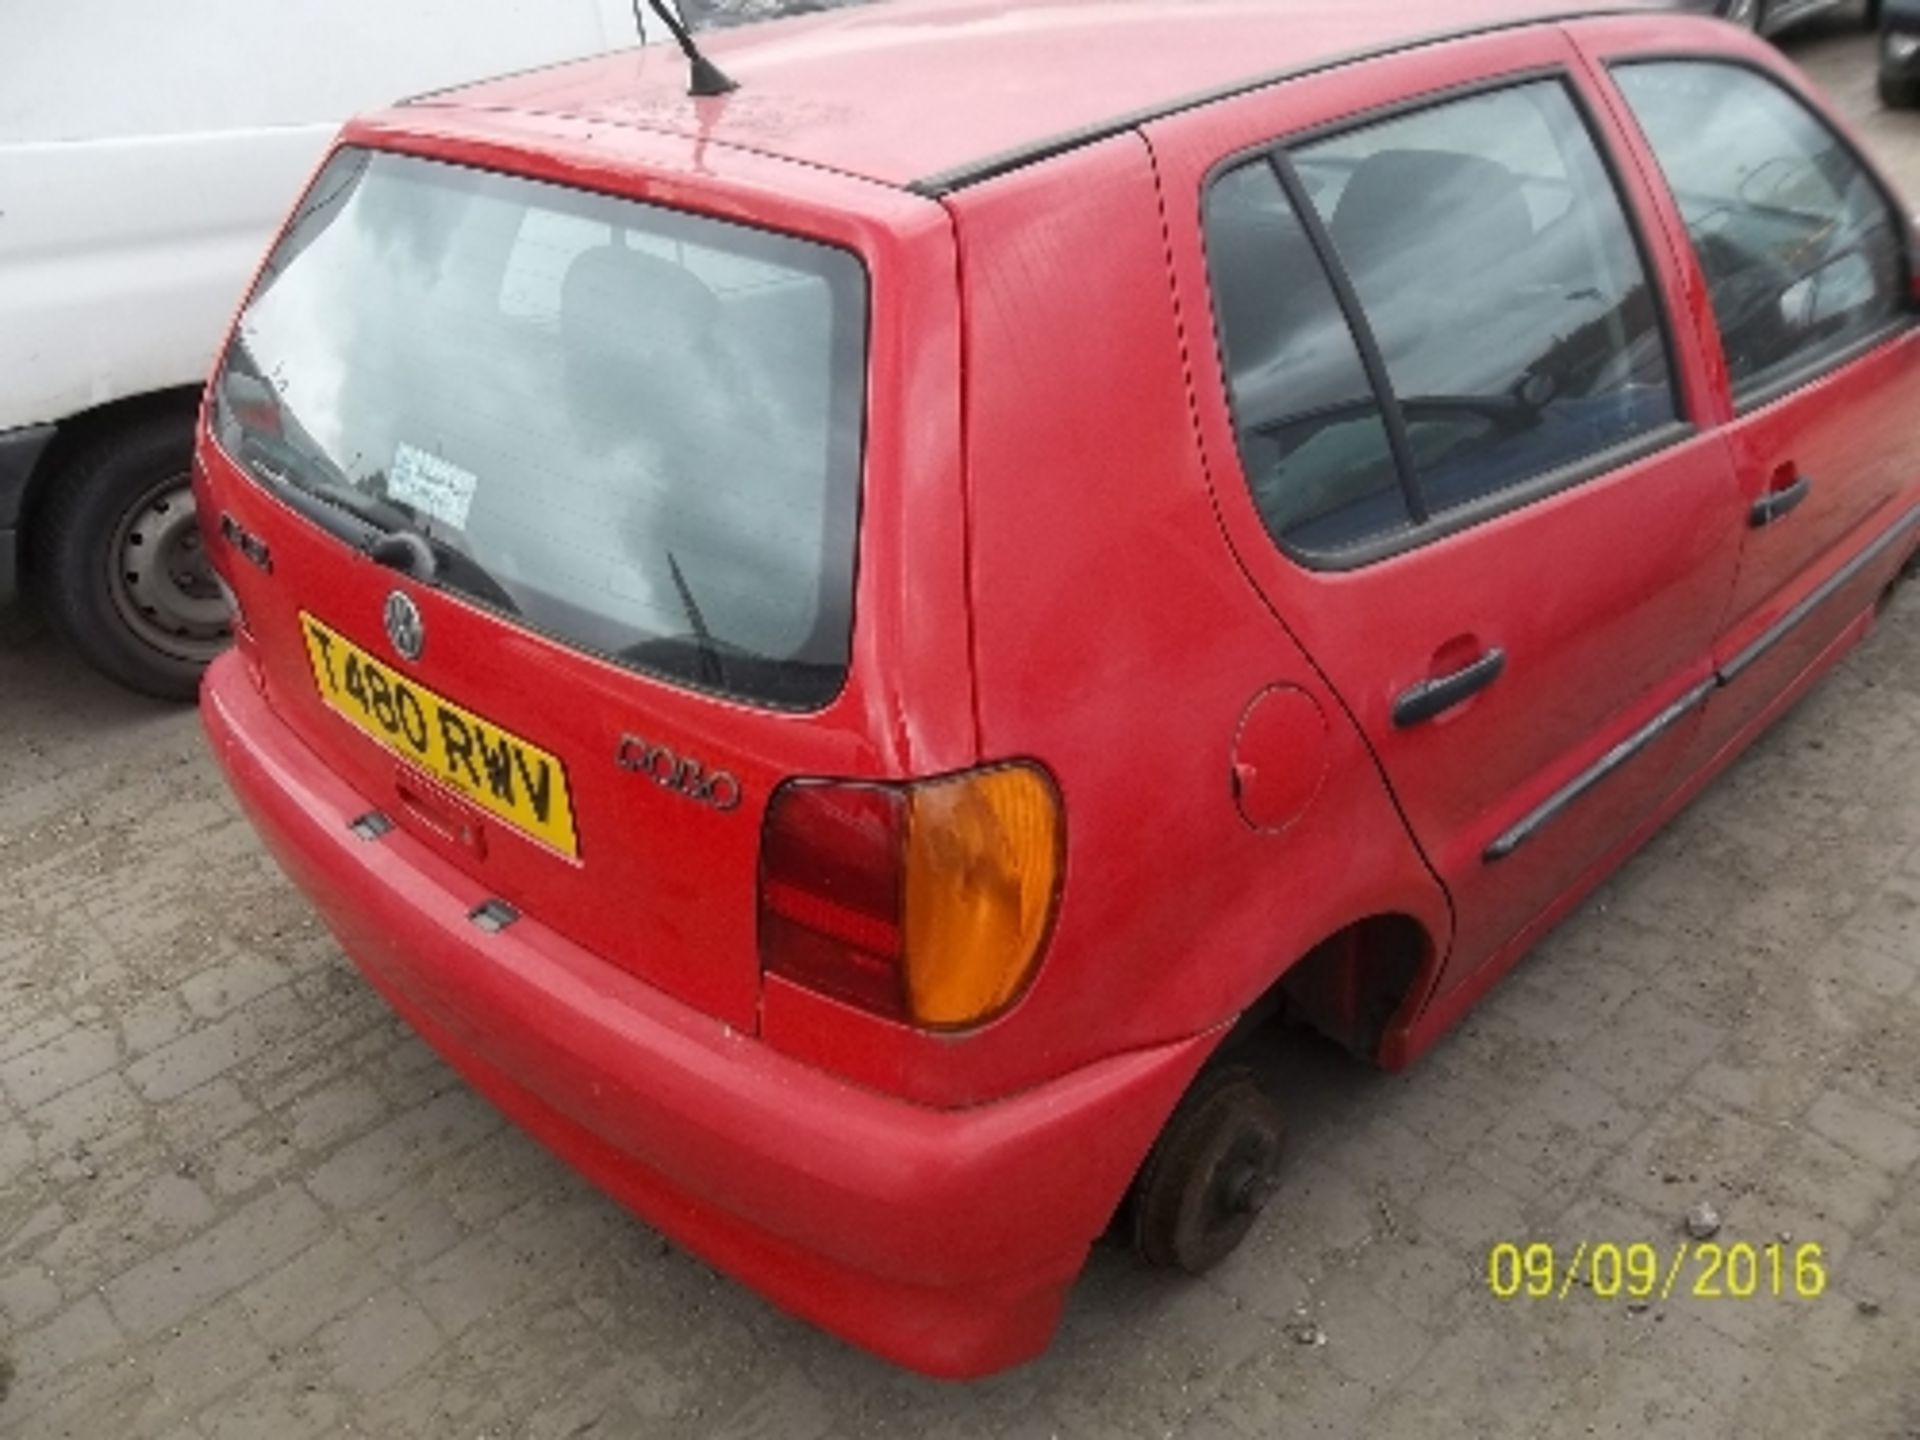 Volkswagen Polo 1.4 CL - T480 RWV Date of registration: 02.03.1999 1390cc, petrol, manual, red - Image 3 of 4